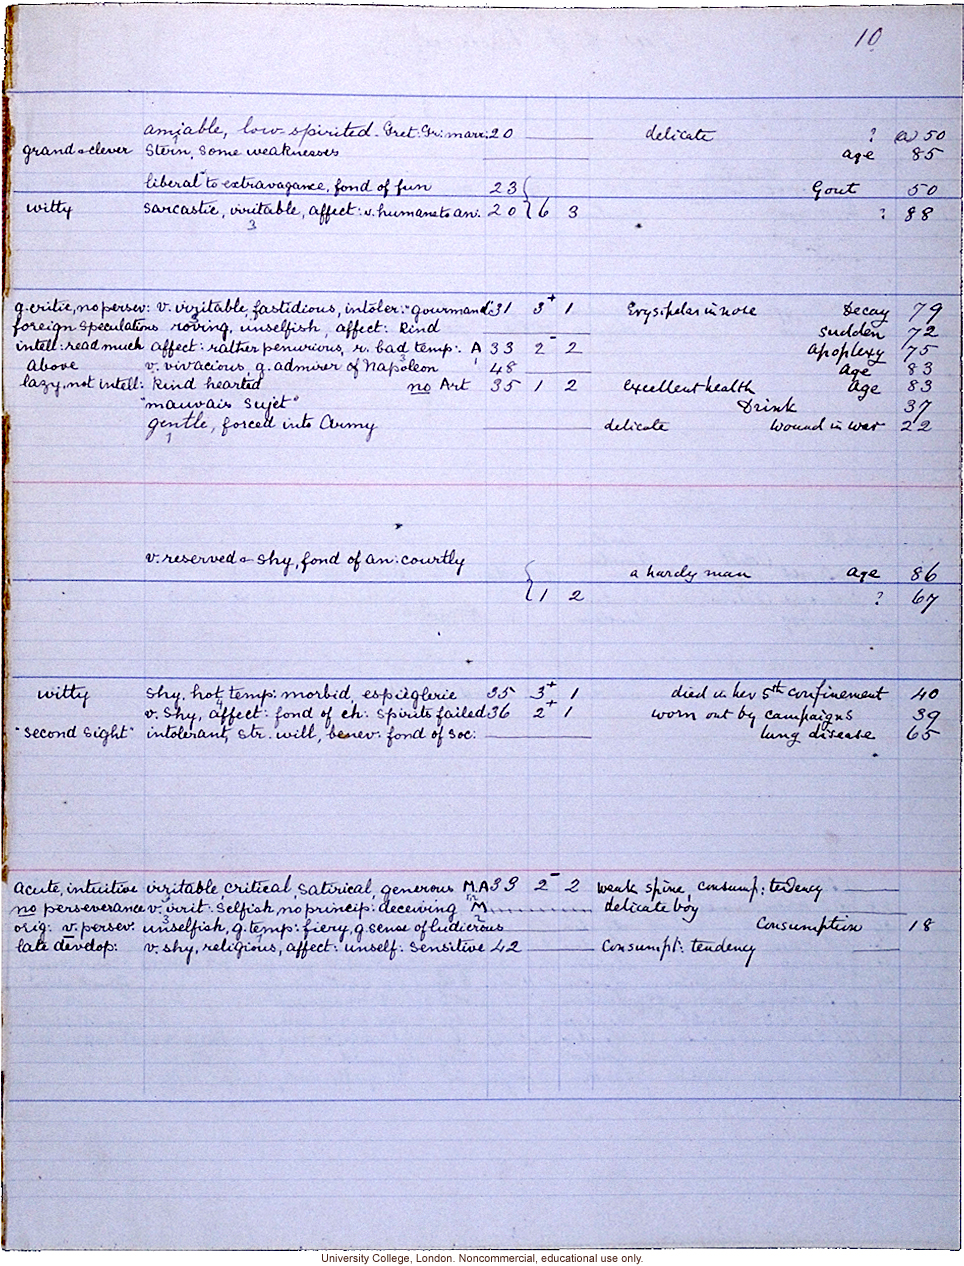 Pedigree data collected according to Franics Galton's <i>Record of Family Faculties</i> (1884)